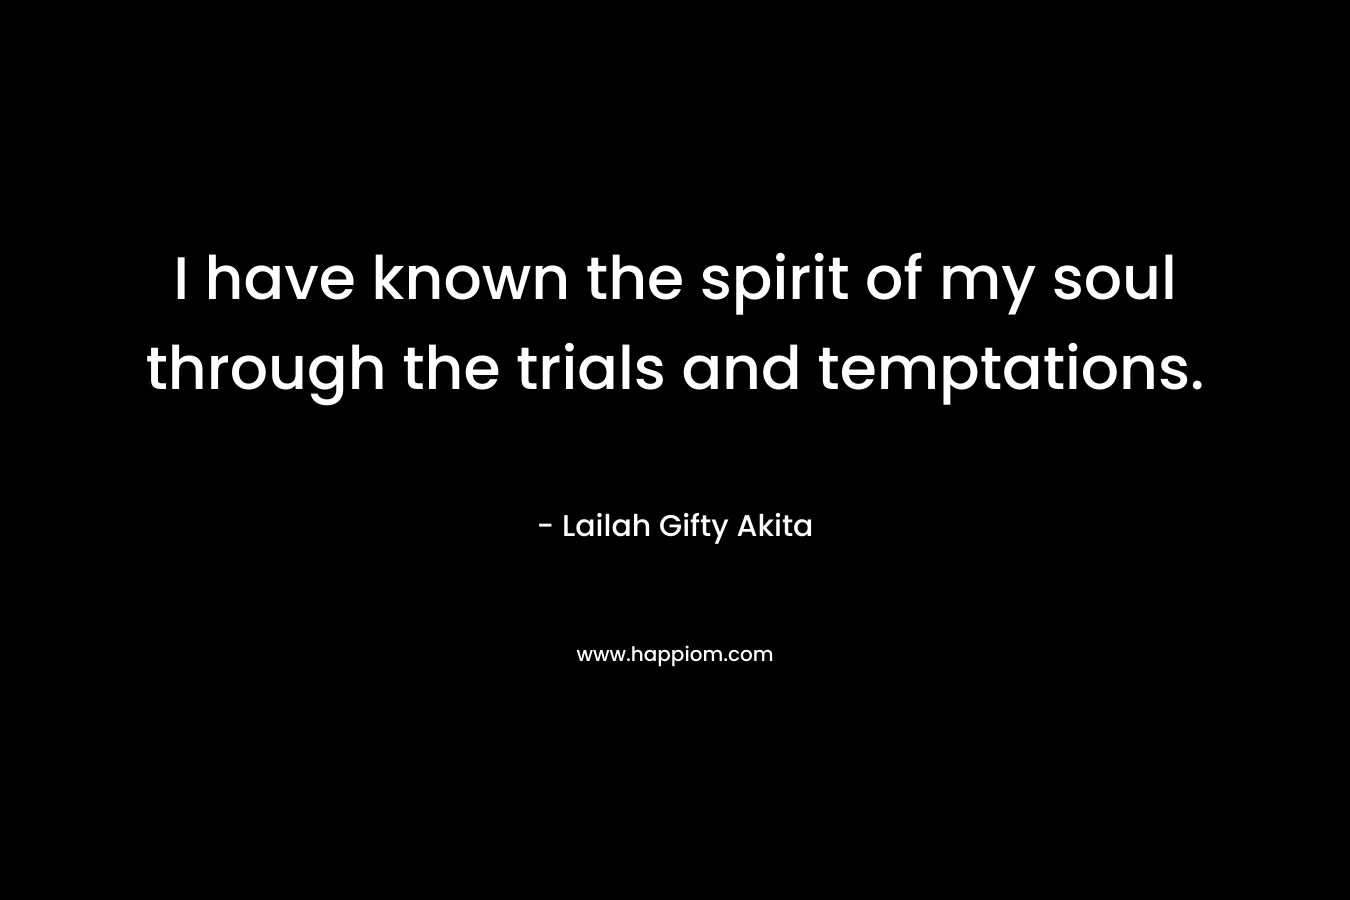 I have known the spirit of my soul through the trials and temptations. – Lailah Gifty Akita